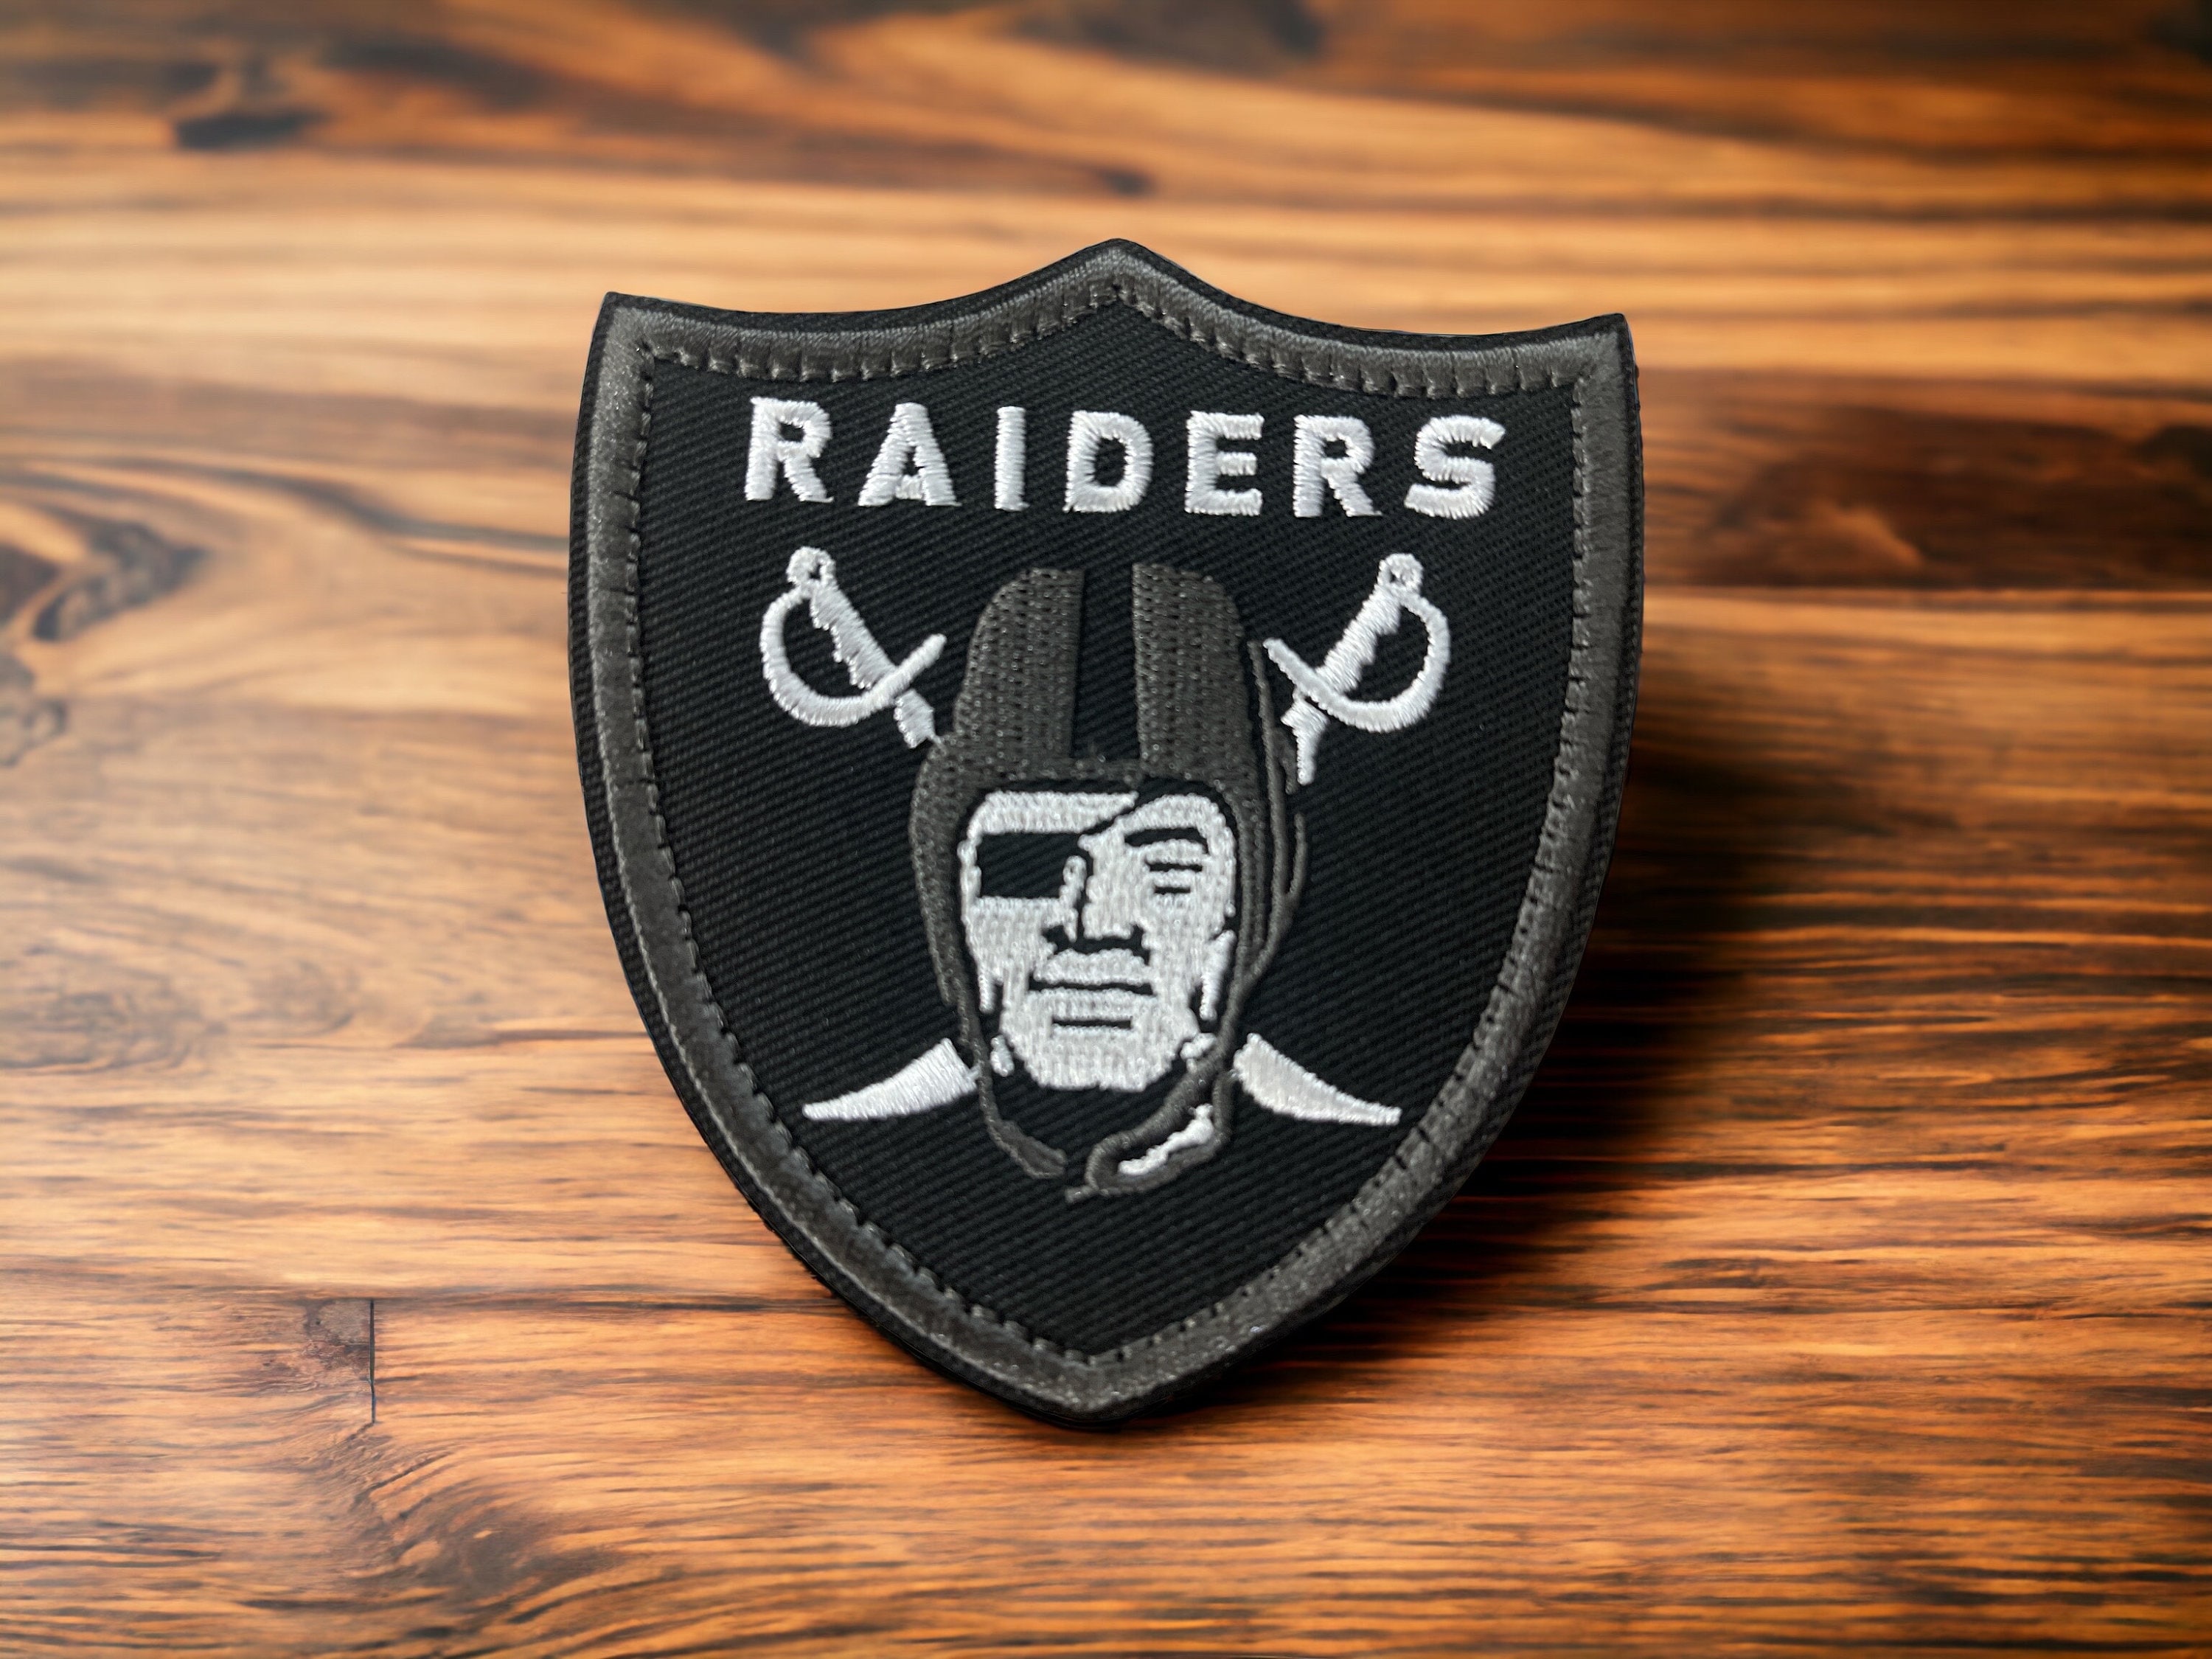  Raiders Patch Hook and Loop Tactical Morale Applique Fastener  Military Embroidered Patch 2Pcs (Color 2) : Arts, Crafts & Sewing